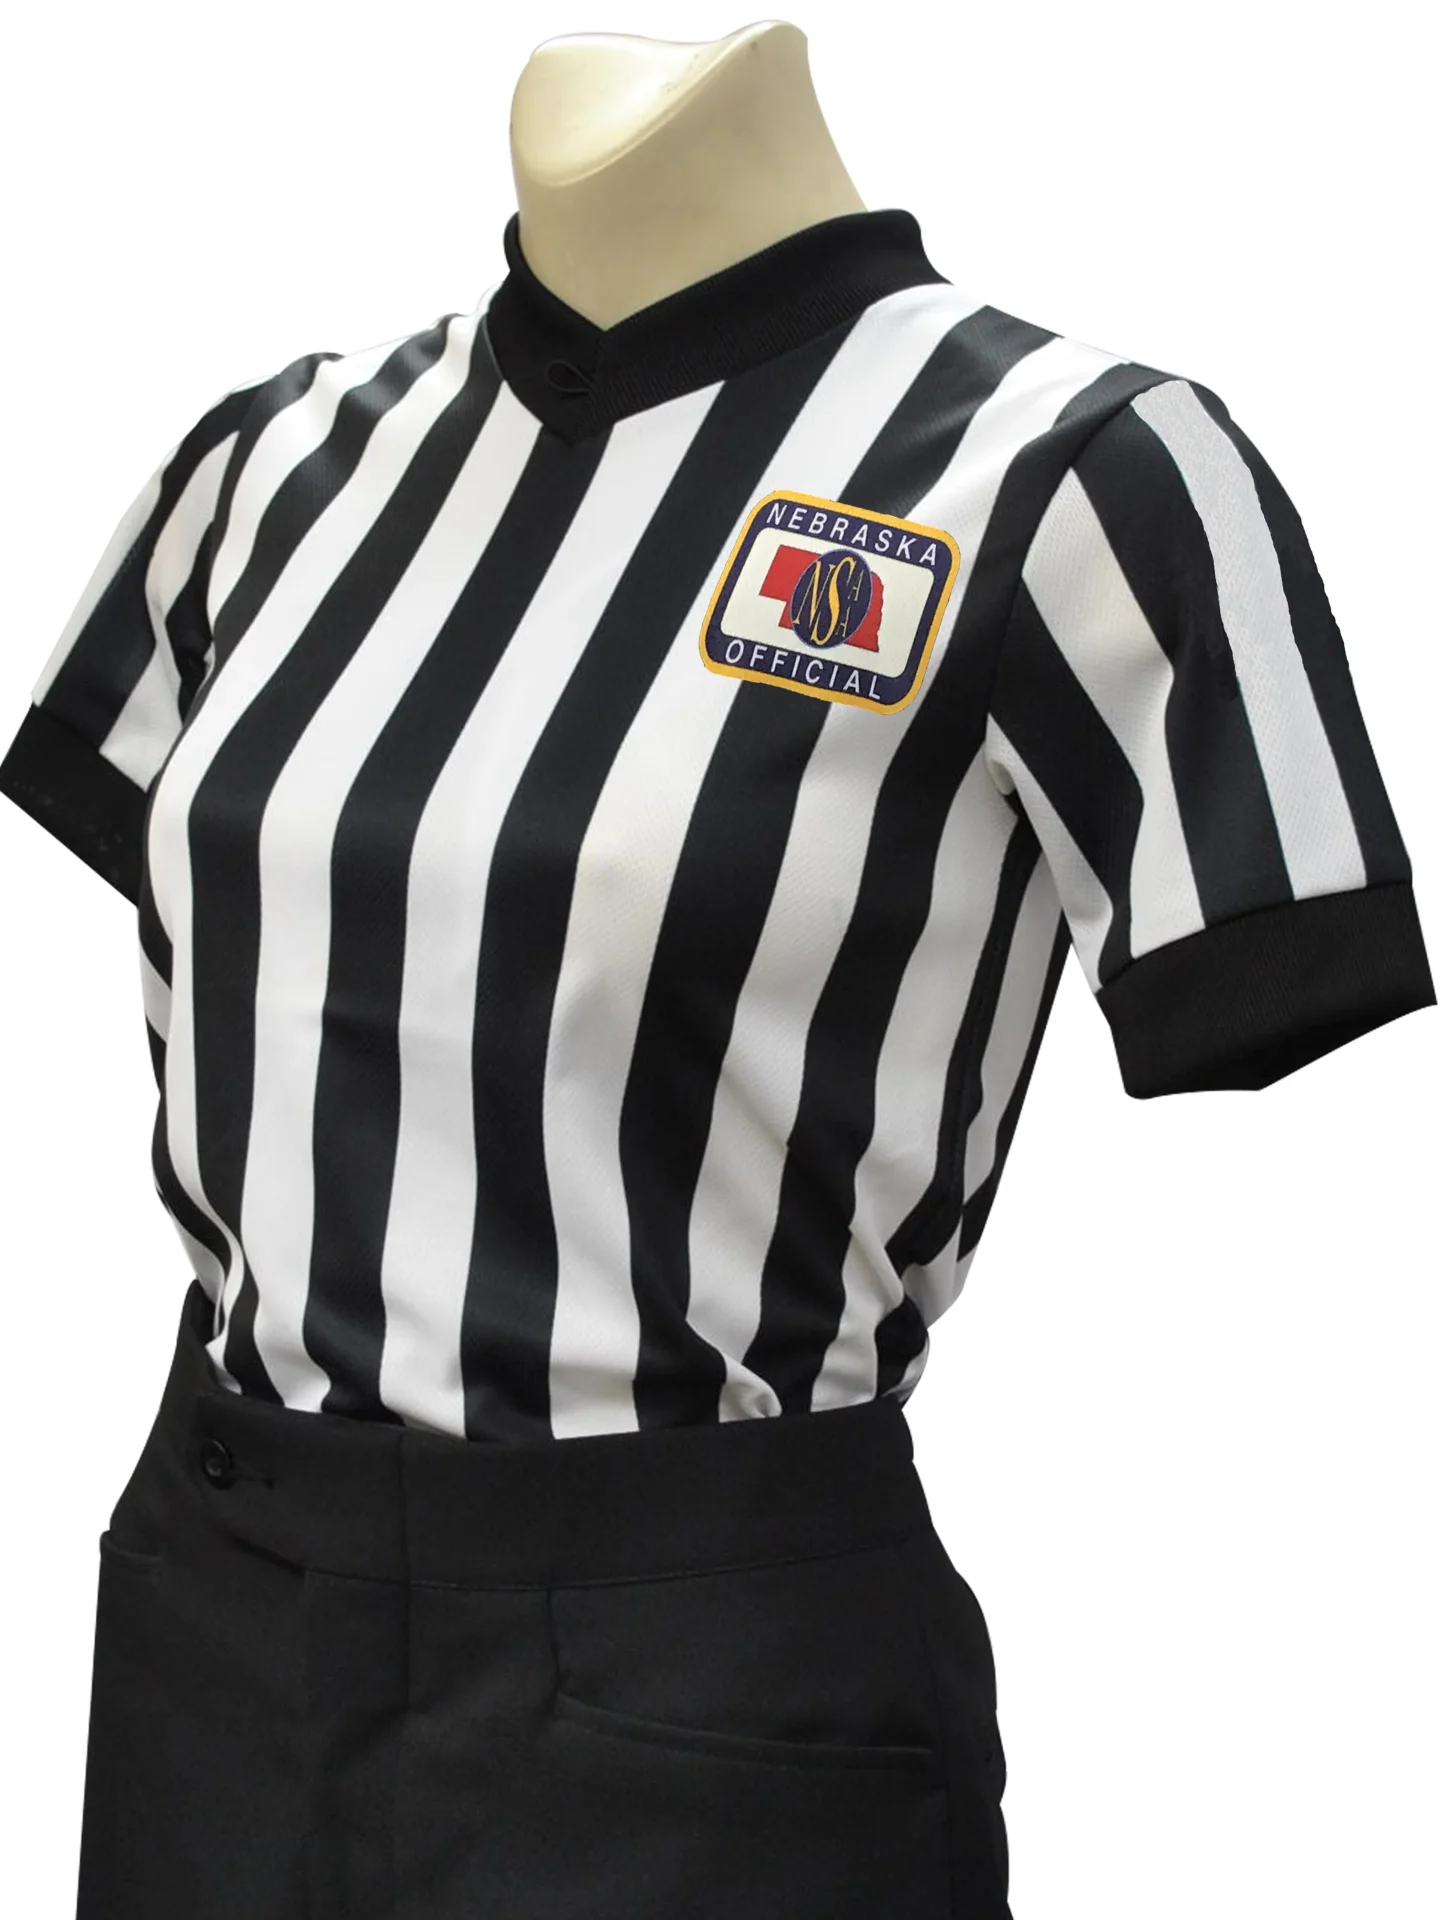 A referee shirt with the name of a referee on it.